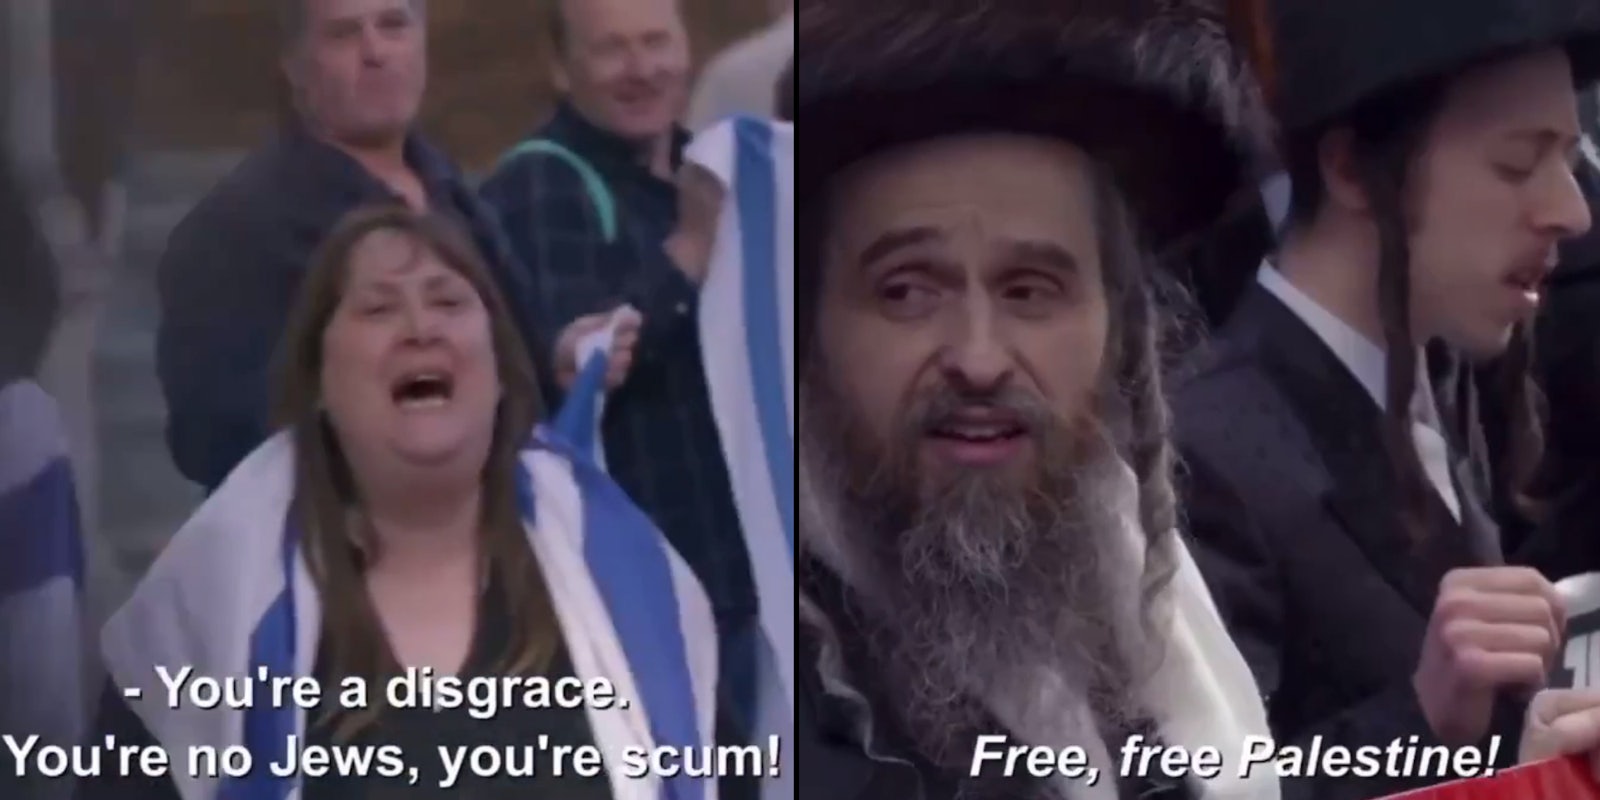 Woman in Israeli flag screams 'You're a disgrace. You're no Jews, you're scum!' (l) Orthodox Jews chanting 'Free, free Palestine!' (r)